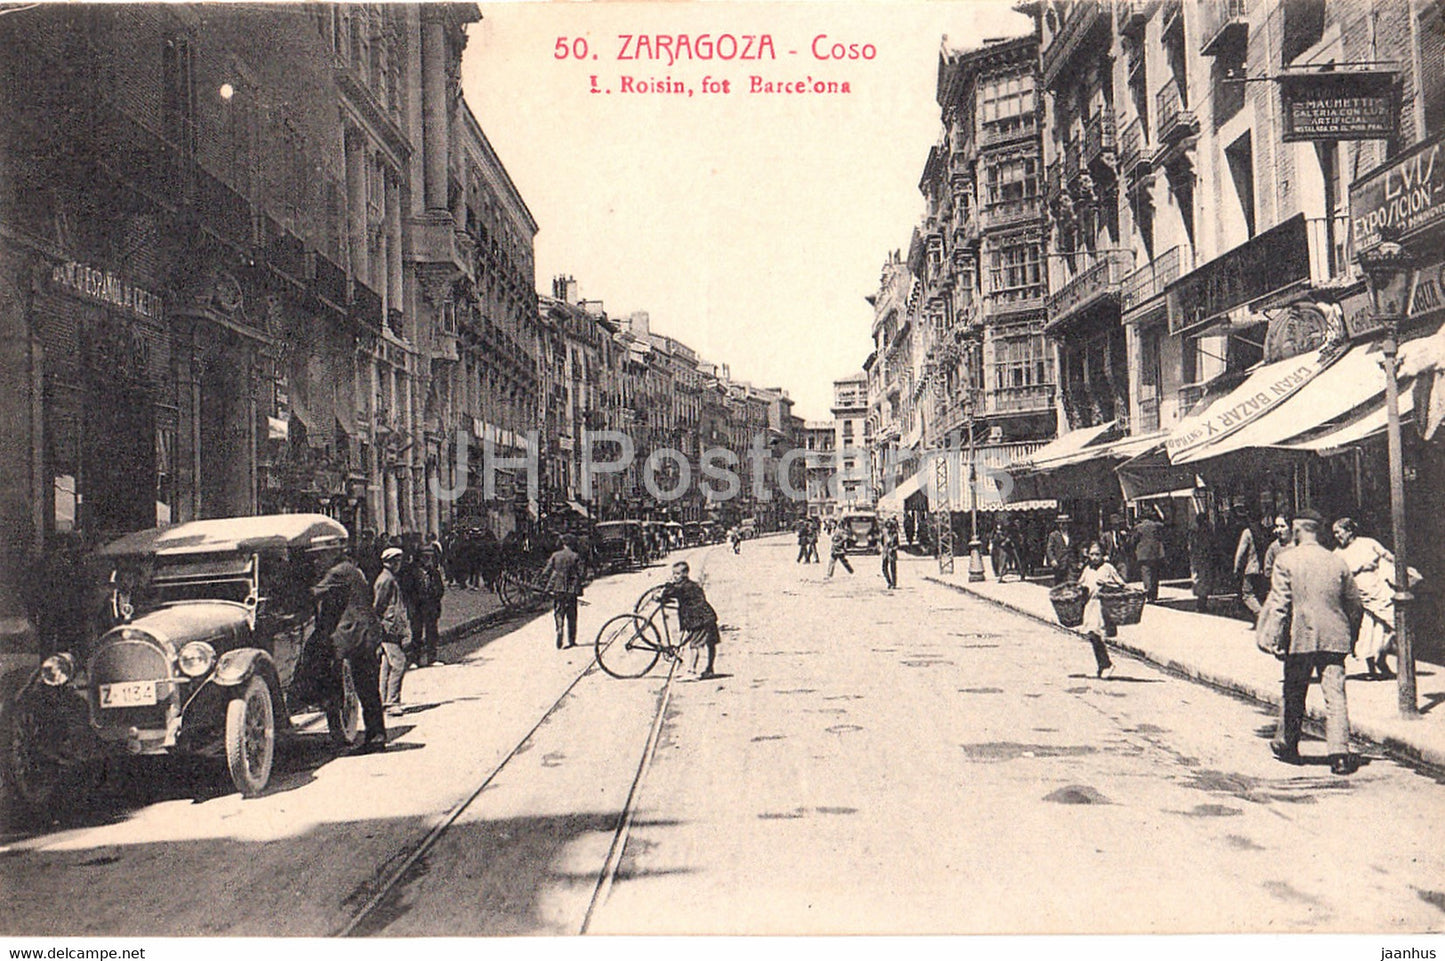 Zaragoza - Coso - old car - cathedral - old postcard - 50 - Spain - unused - JH Postcards